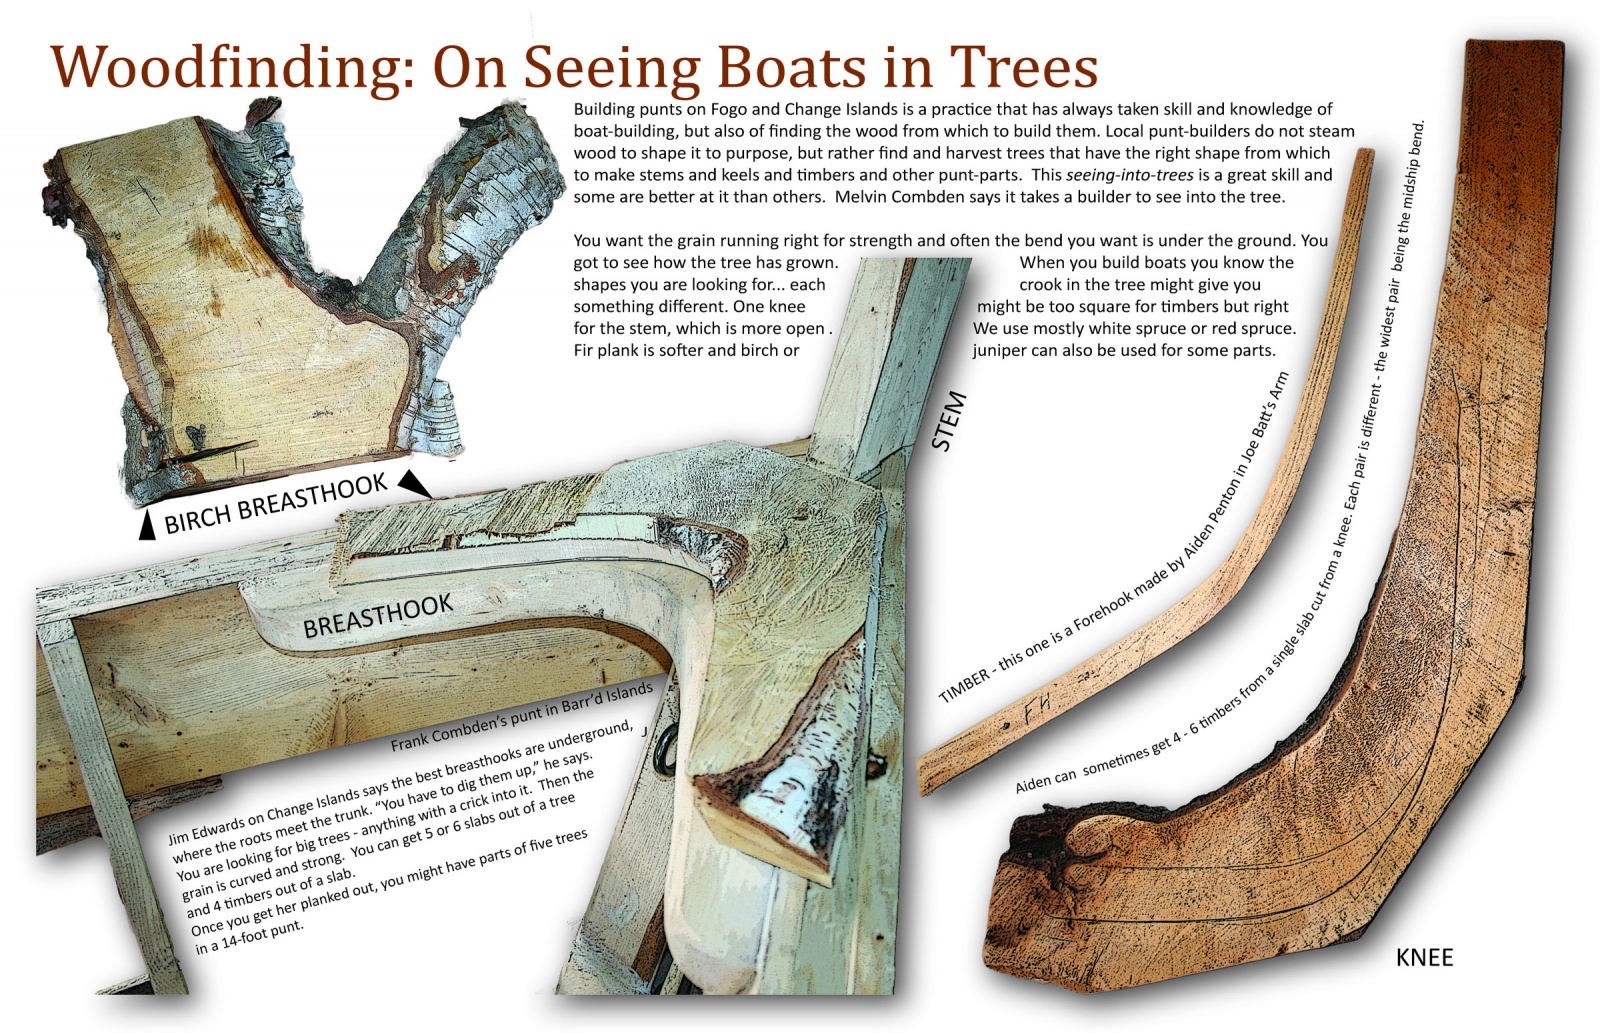 Woodfinding: On Seeing Boats in Trees